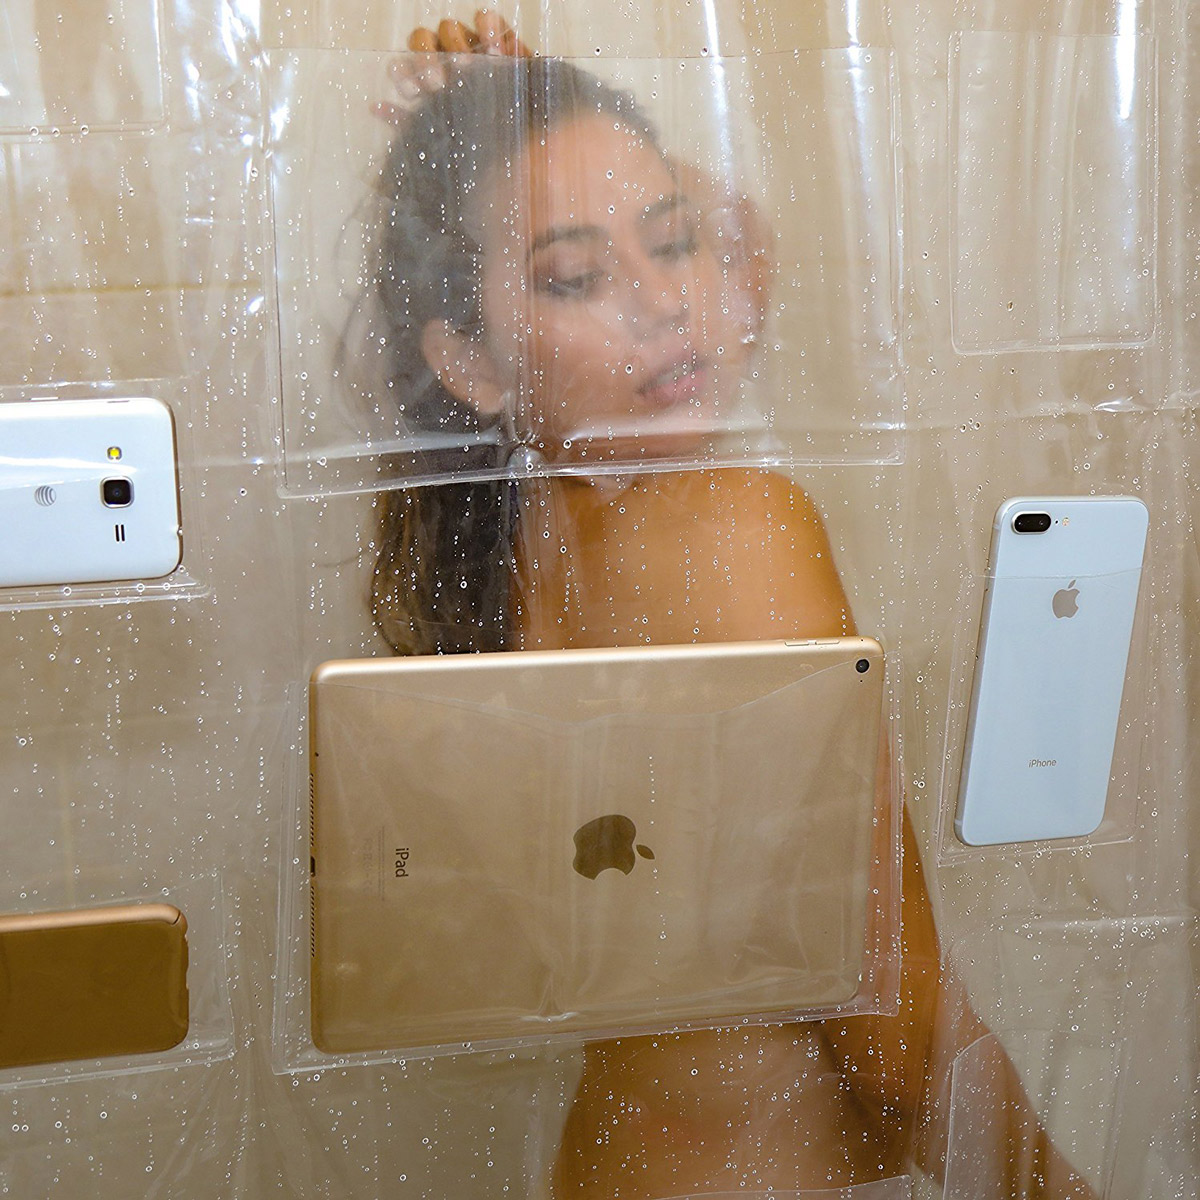 Anne's Big Pocket Shower Curtain Liner Holds Your iPad Tablet or Baby Monitor Completely Waterproof Phone